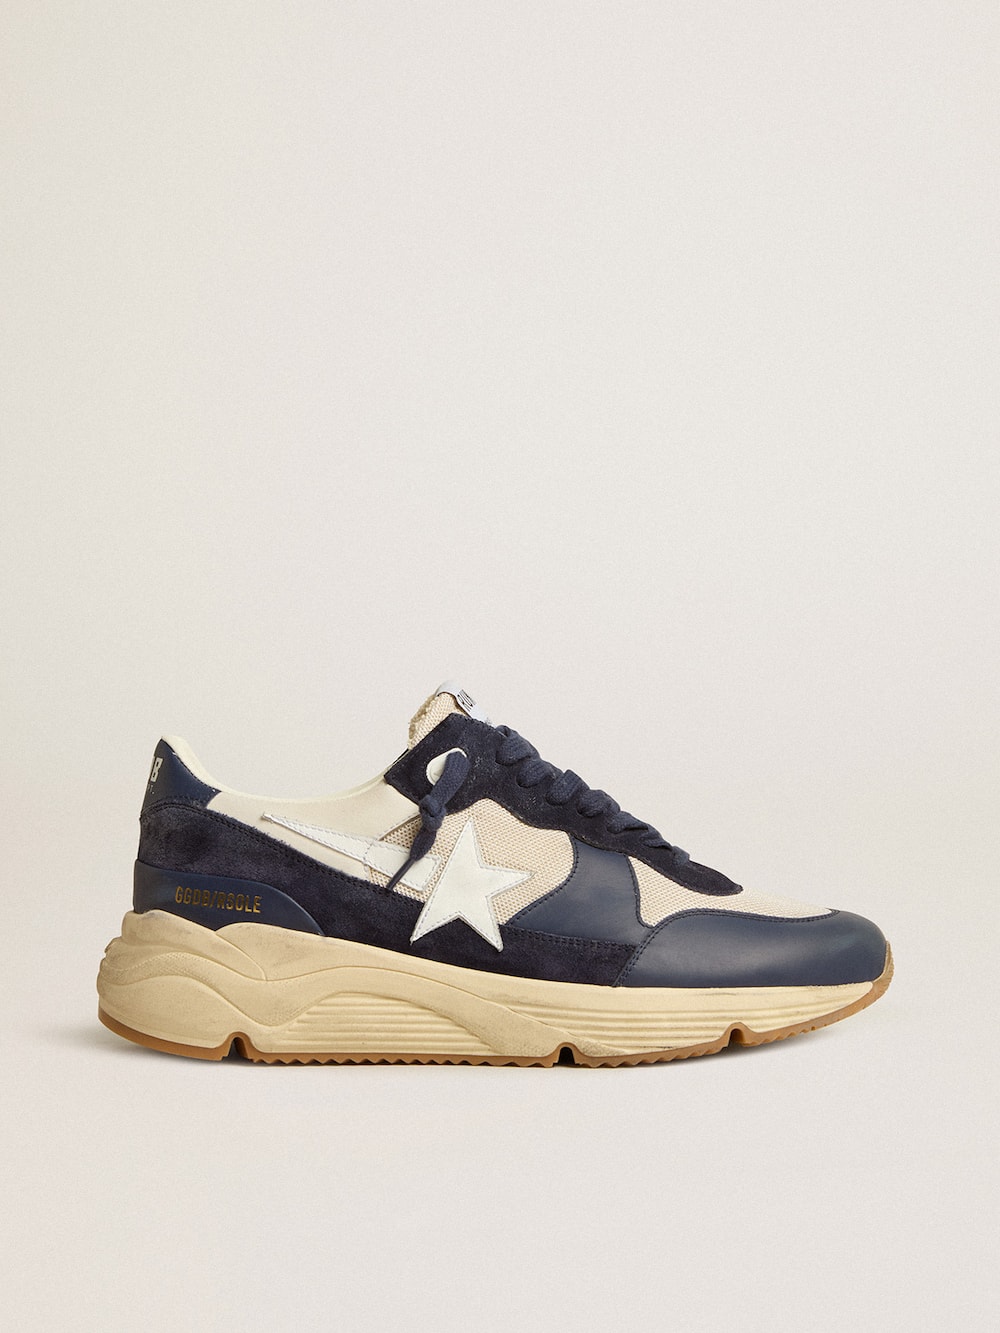 Golden Goose - Running Sole in cream mesh and blue leather with a white leather star in 